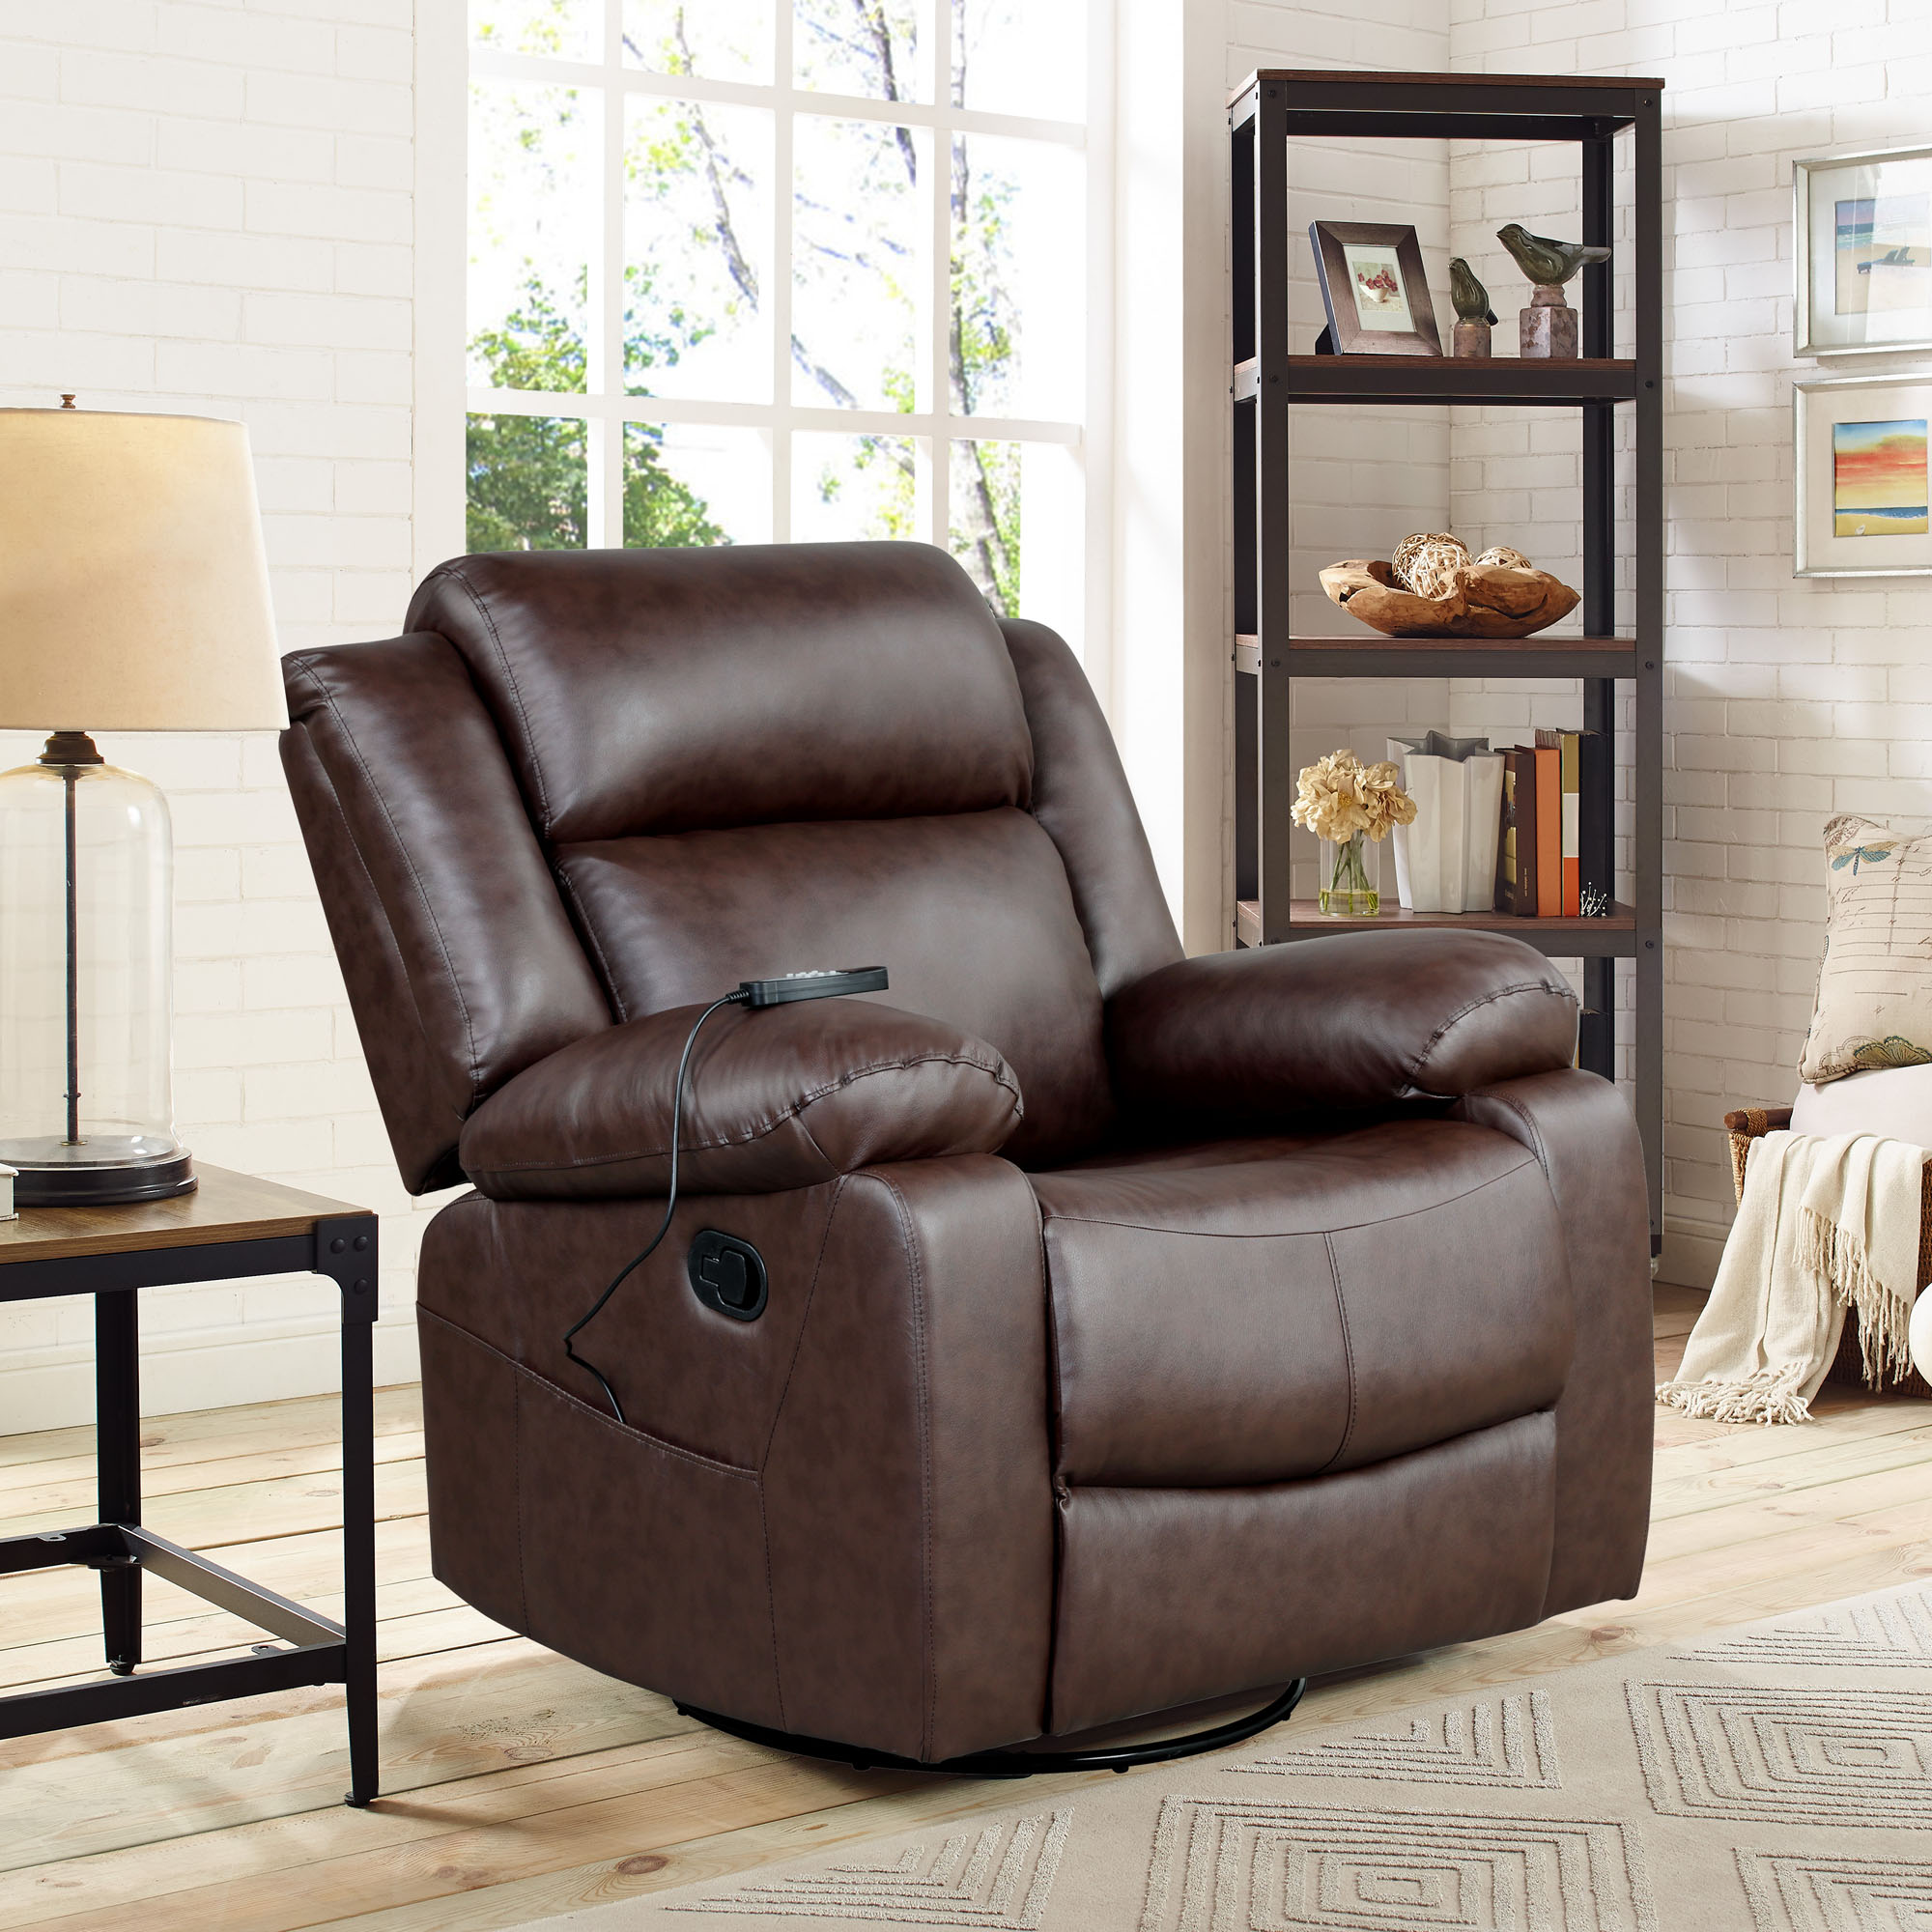 Elm & Oak Maxima Standard Manual Swivel Recliner with Massage and Heat, Brown Faux Leather - image 2 of 13